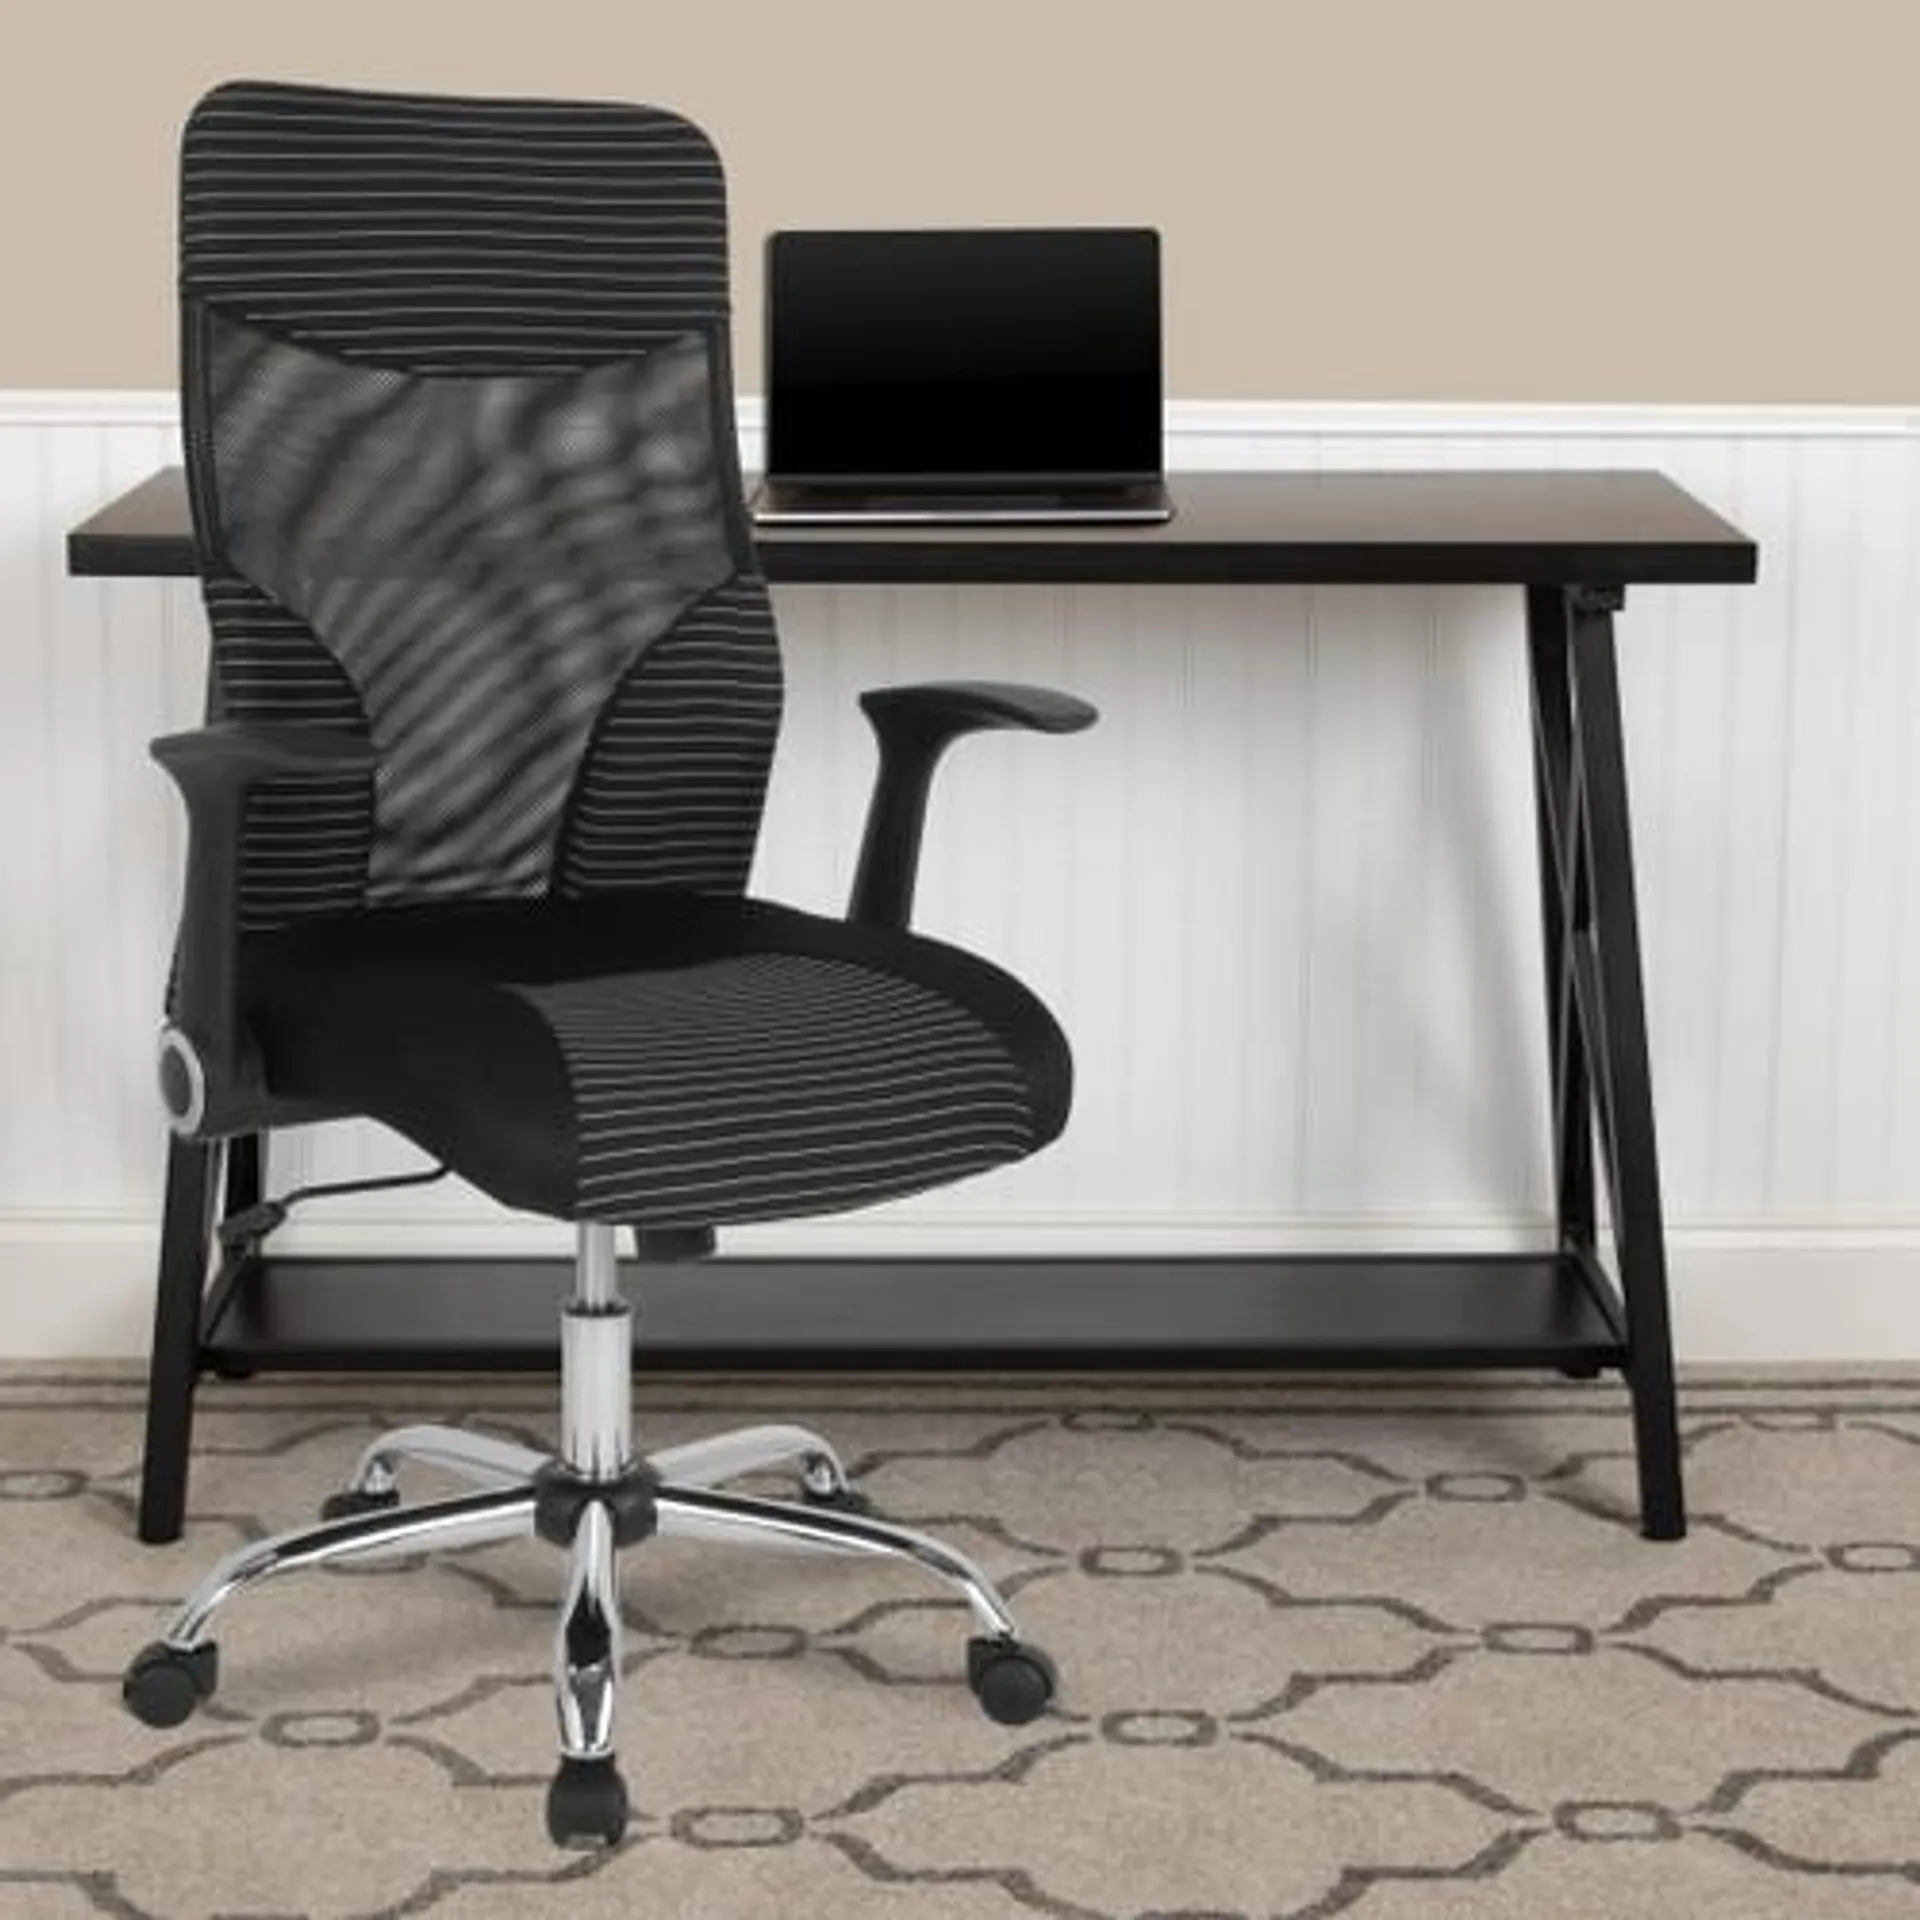 Milford High Back Ergonomic Office Chair with Contemporary Mesh Design in Black and White - LFW83AGG